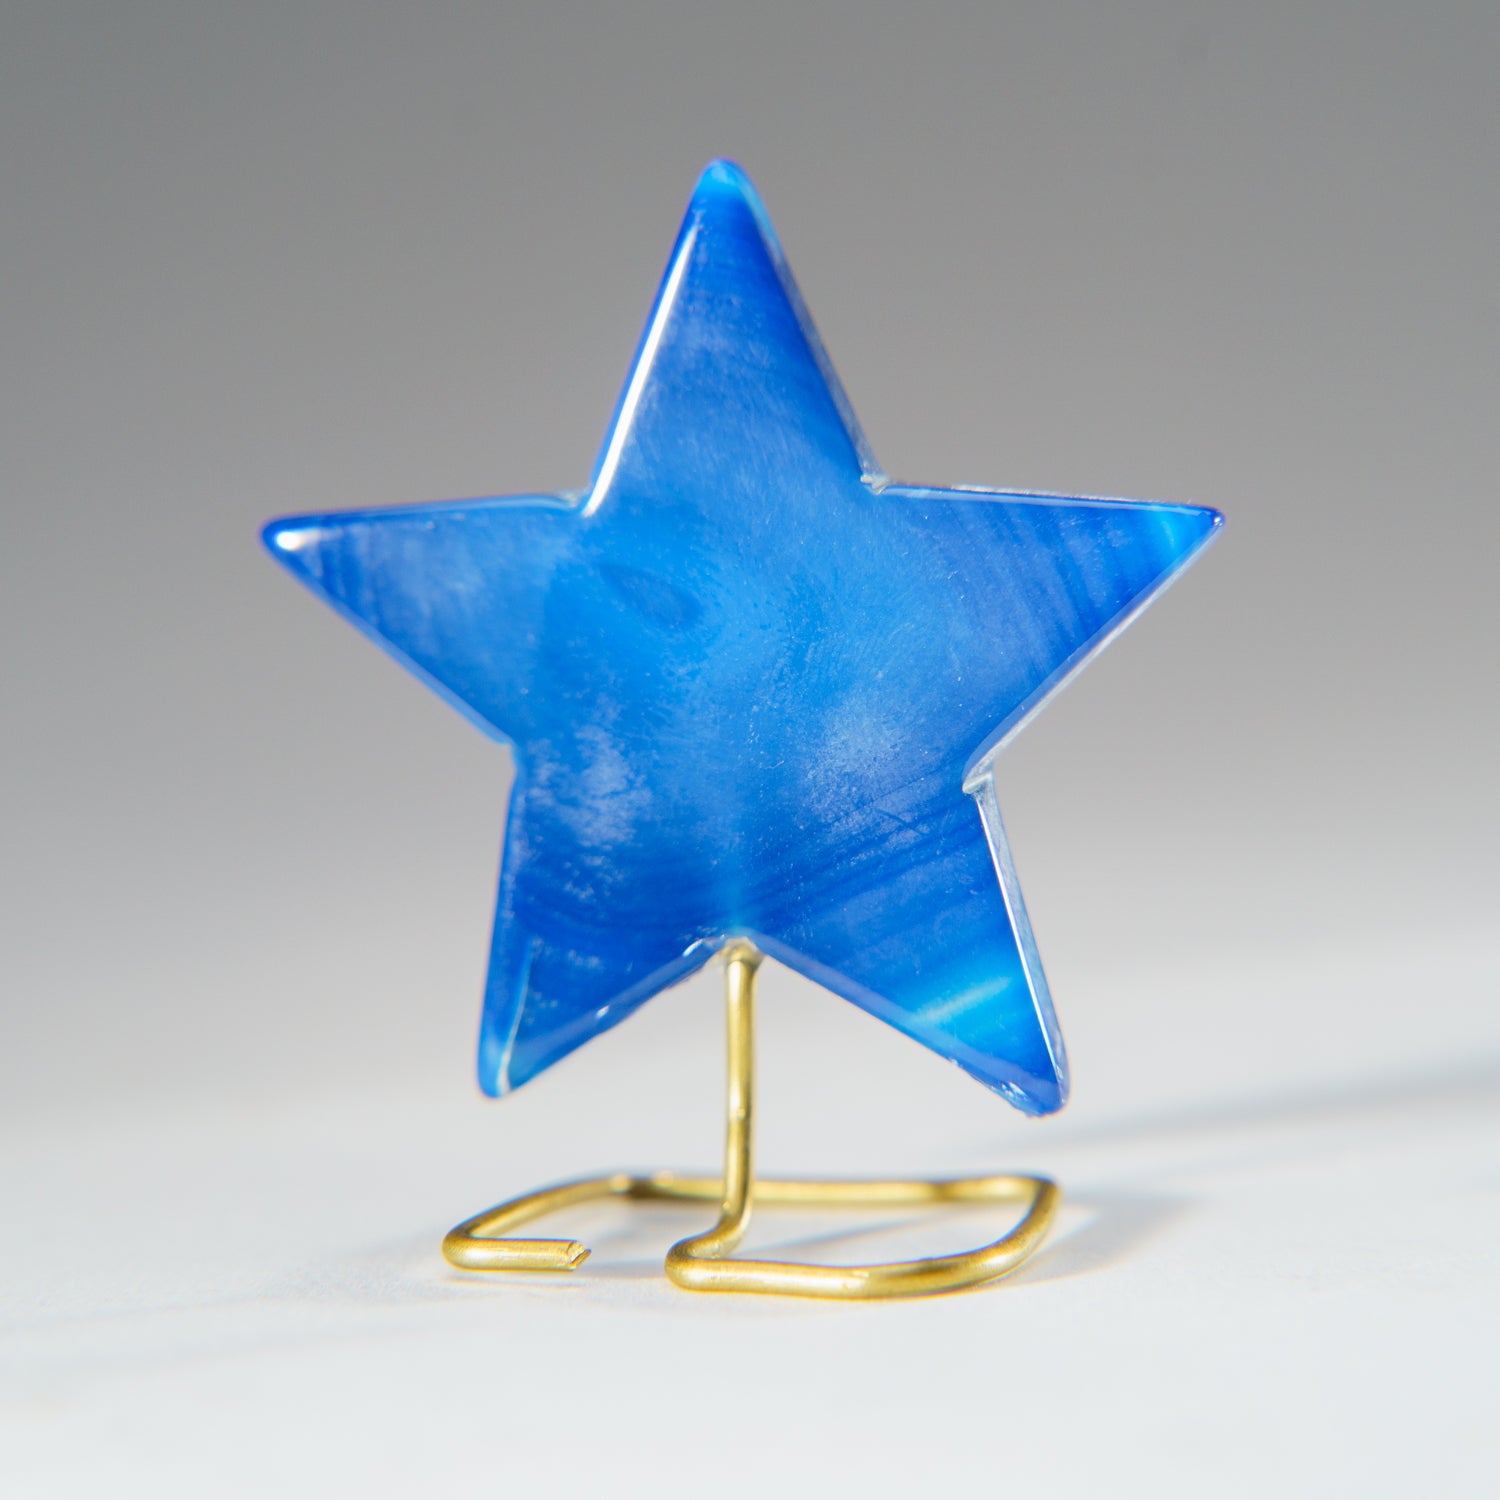 Polished Blue Agate Star on Custom Metal Stand (33.9 grams)